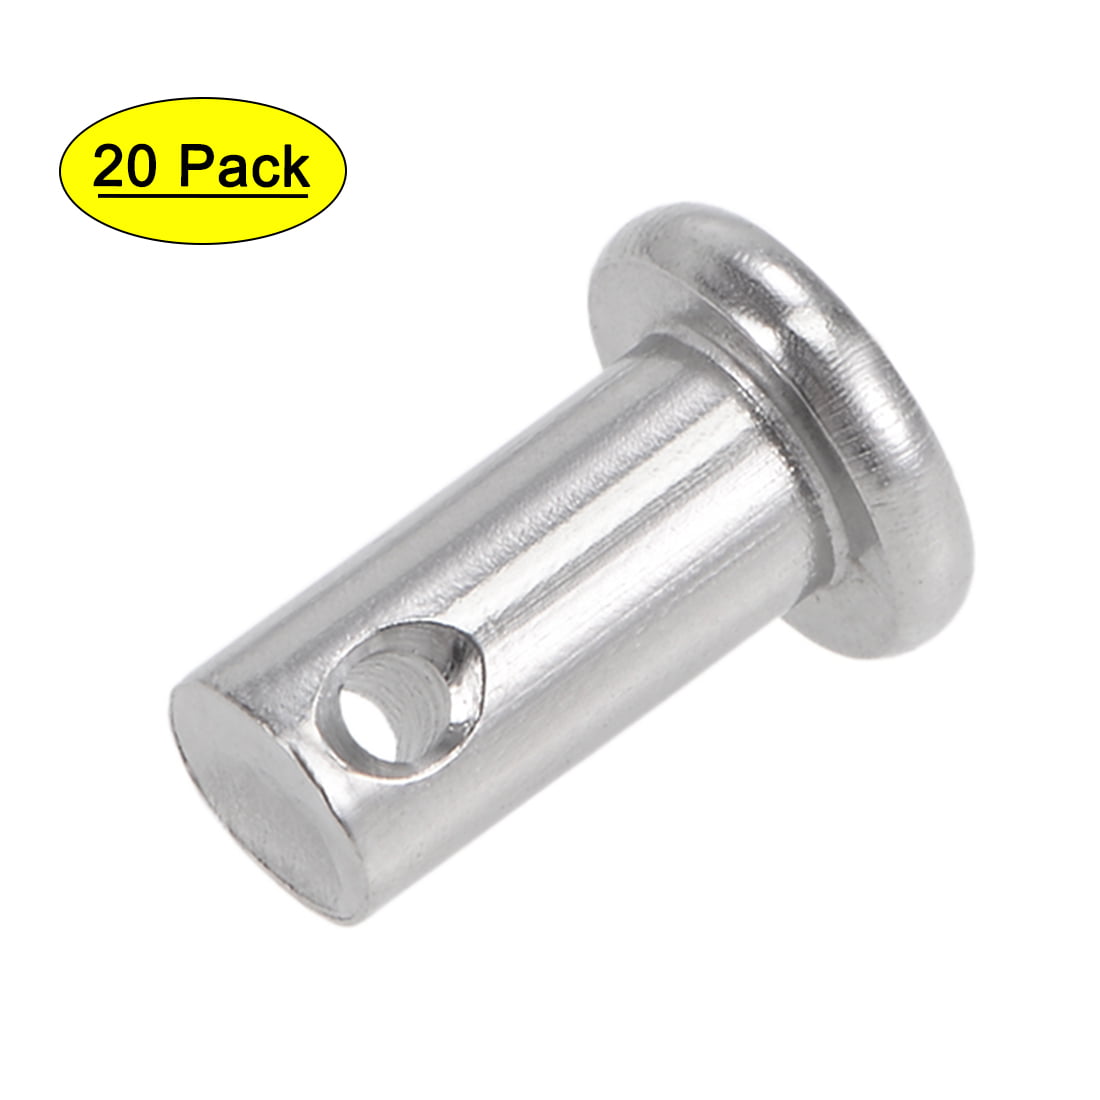 uxcell Single Hole Clevis Pins - 8mm X 60mm Flat Head 304 Stainless Steel  Link Hinge Pin 5Pcs